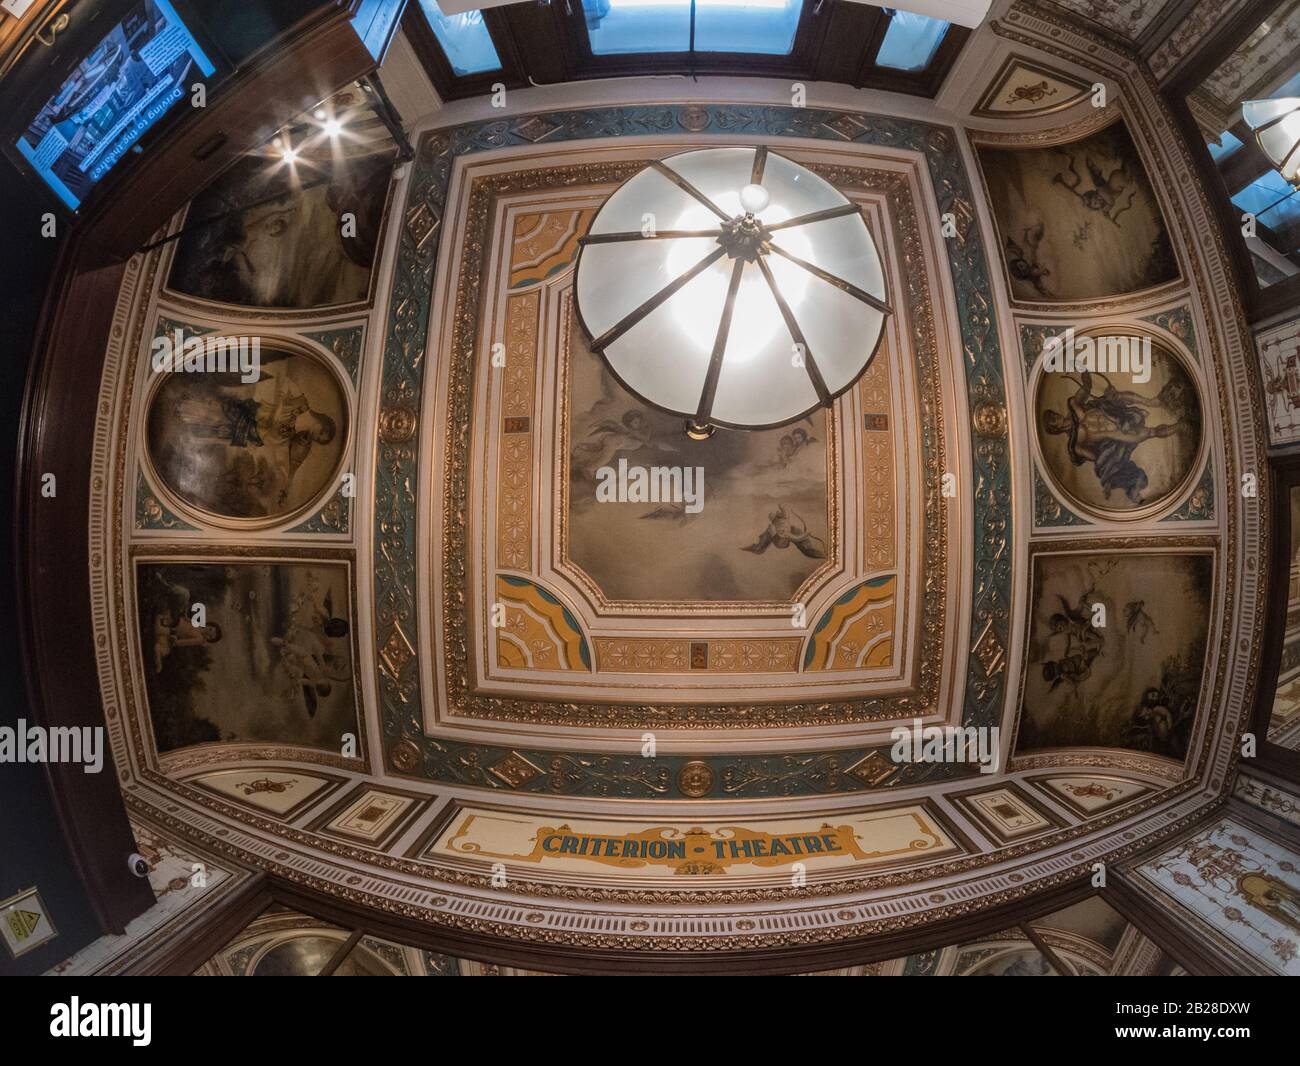 Criterion Theatre ceiling, Piccadilly Circus, London, UK Stock Photo